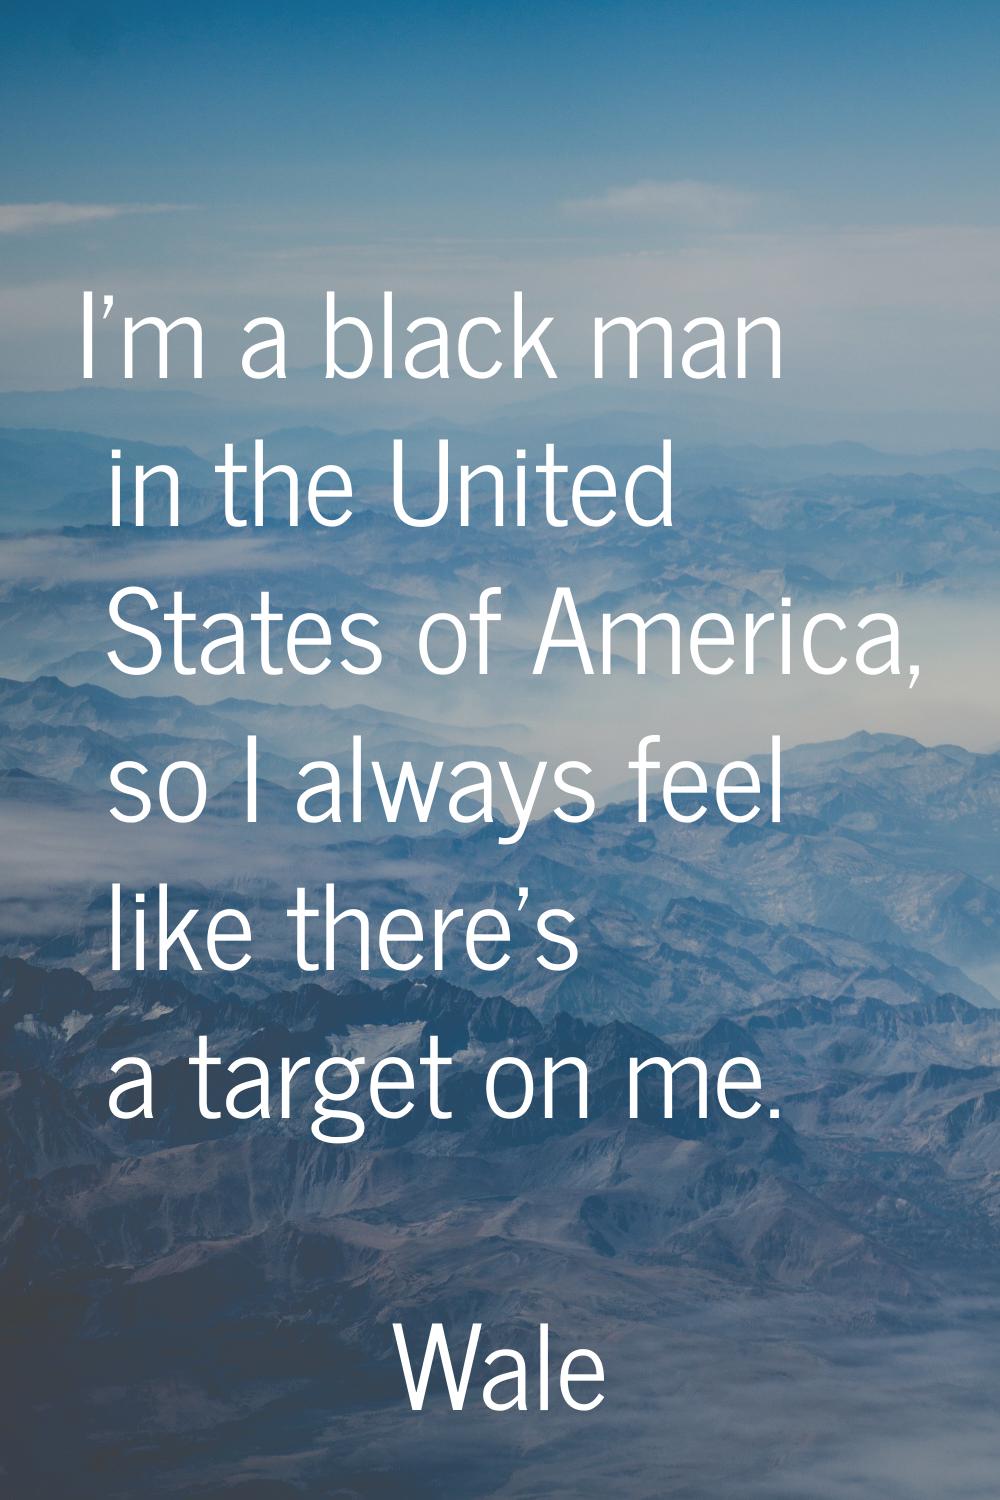 I'm a black man in the United States of America, so I always feel like there's a target on me.